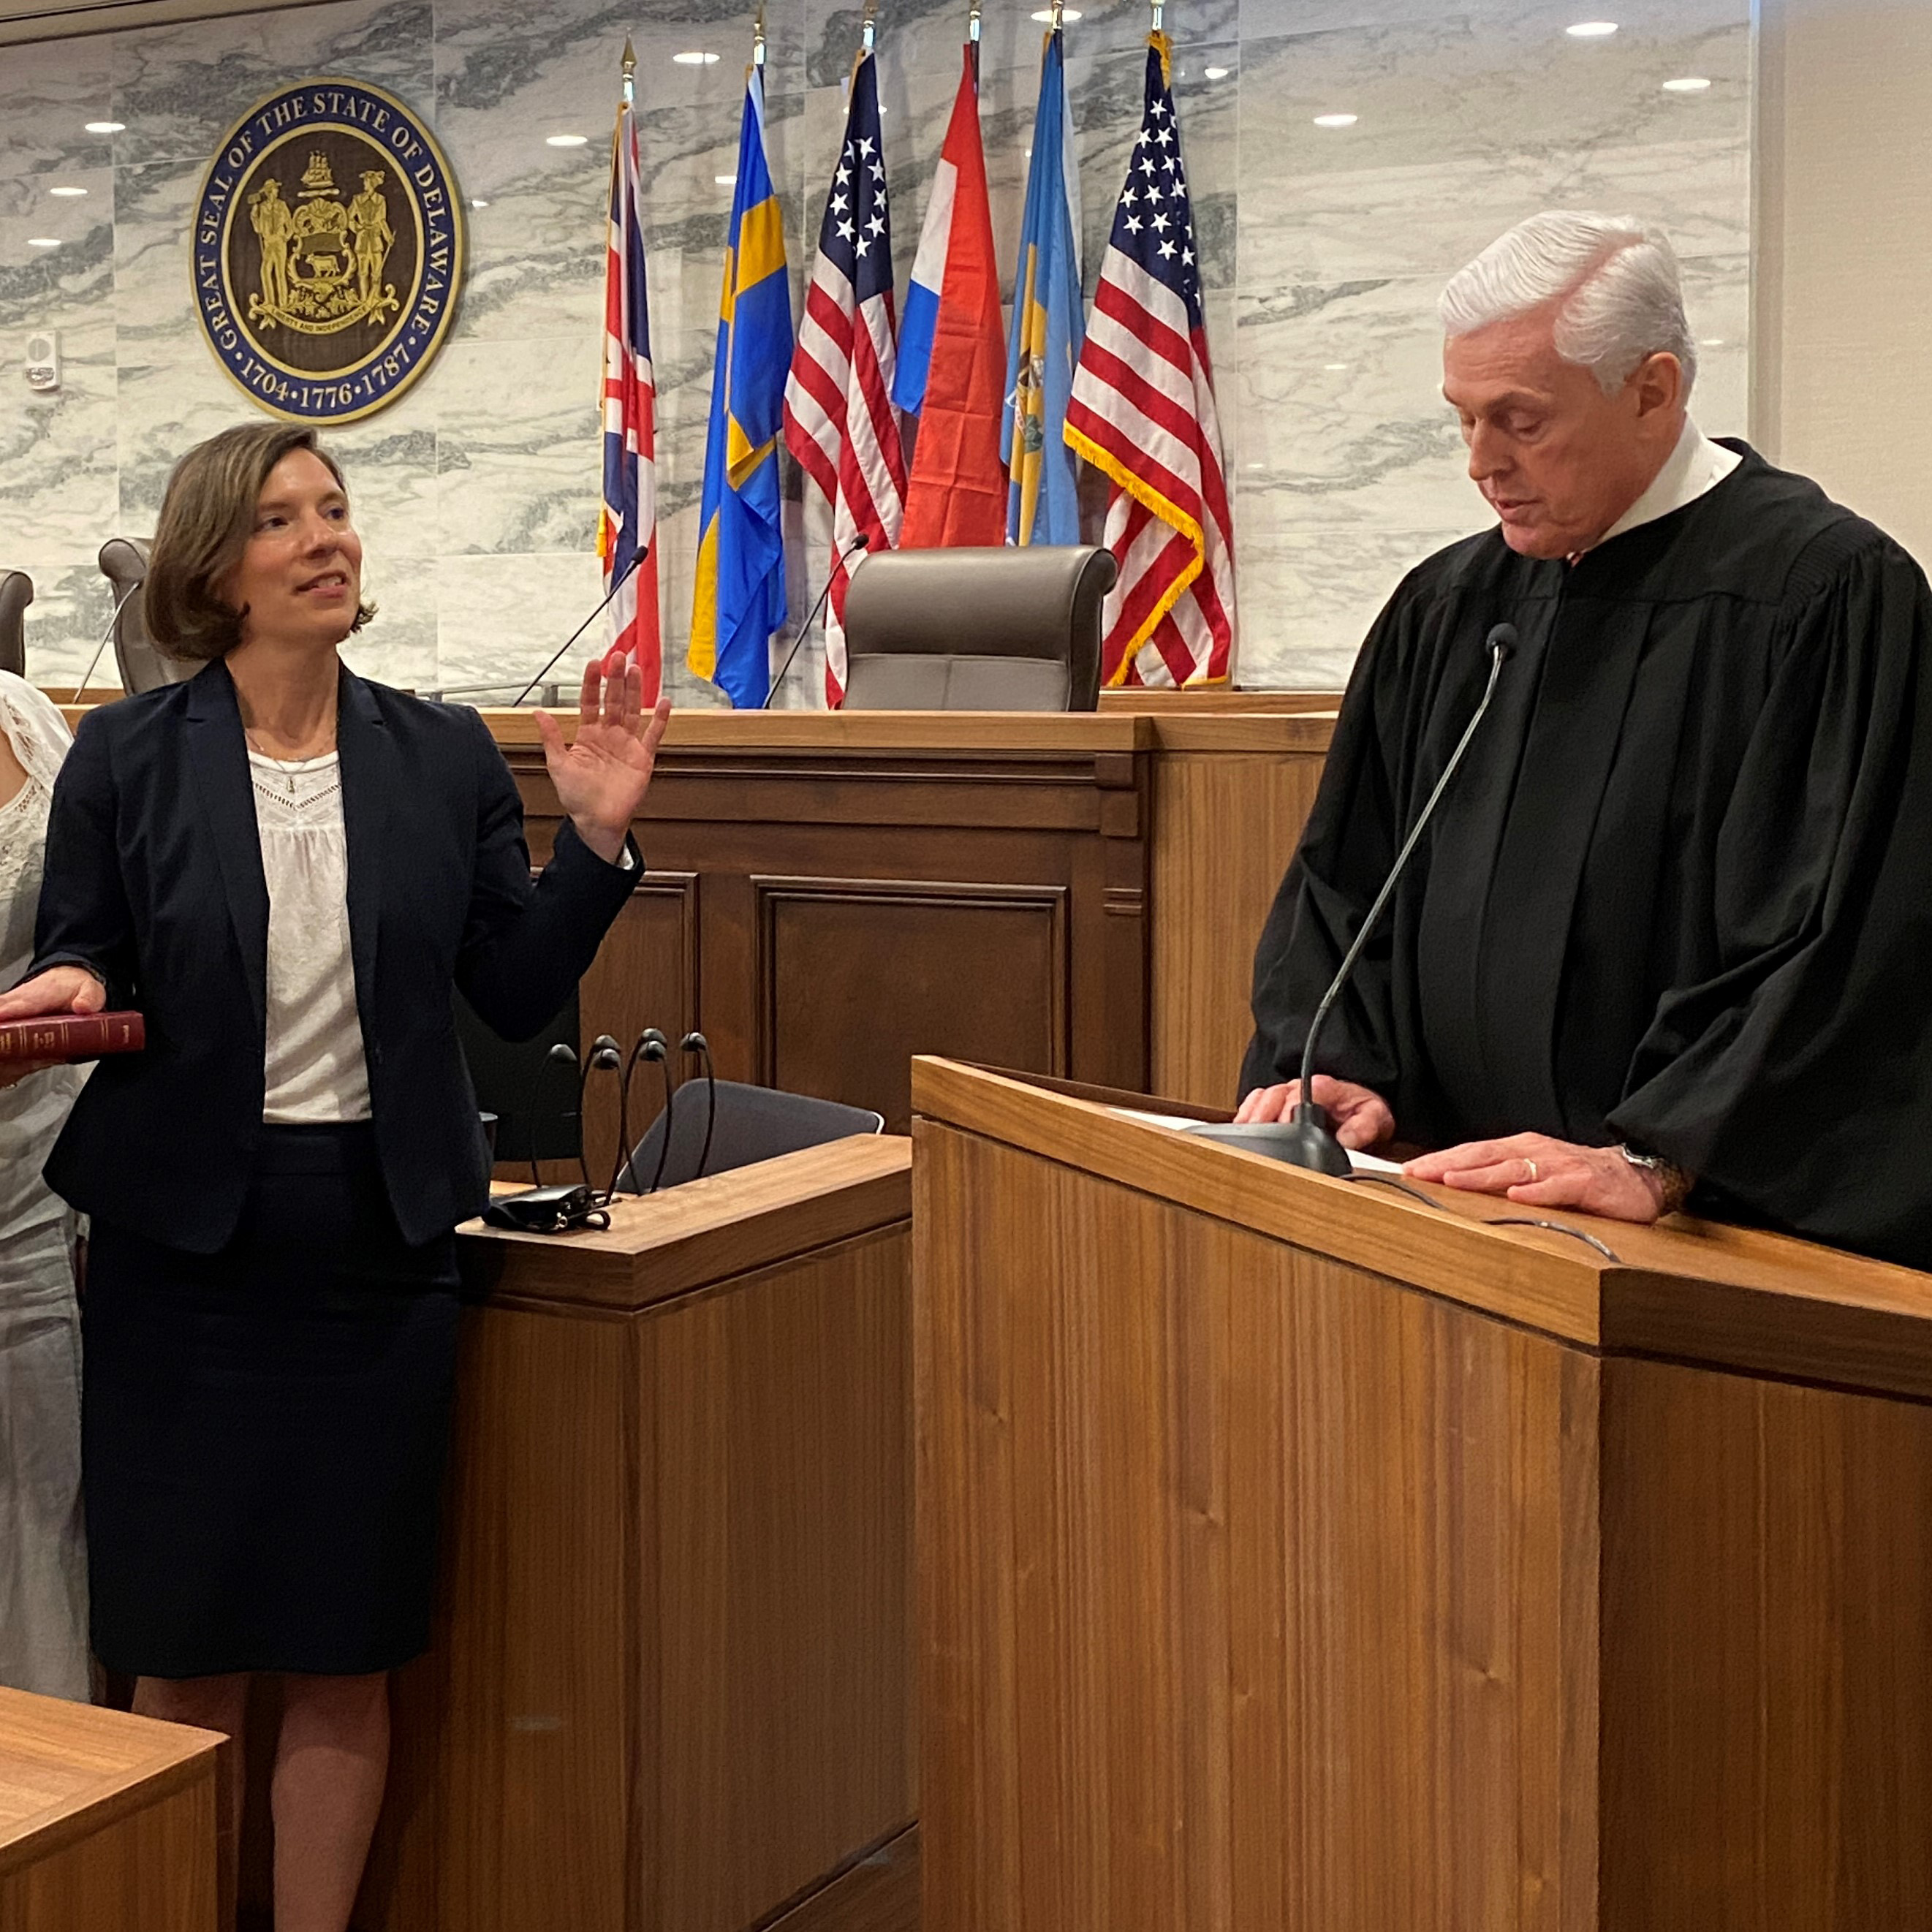 The Honorable Eliza M. Hirst takes the Oath of Office as a Judge for the Family Court